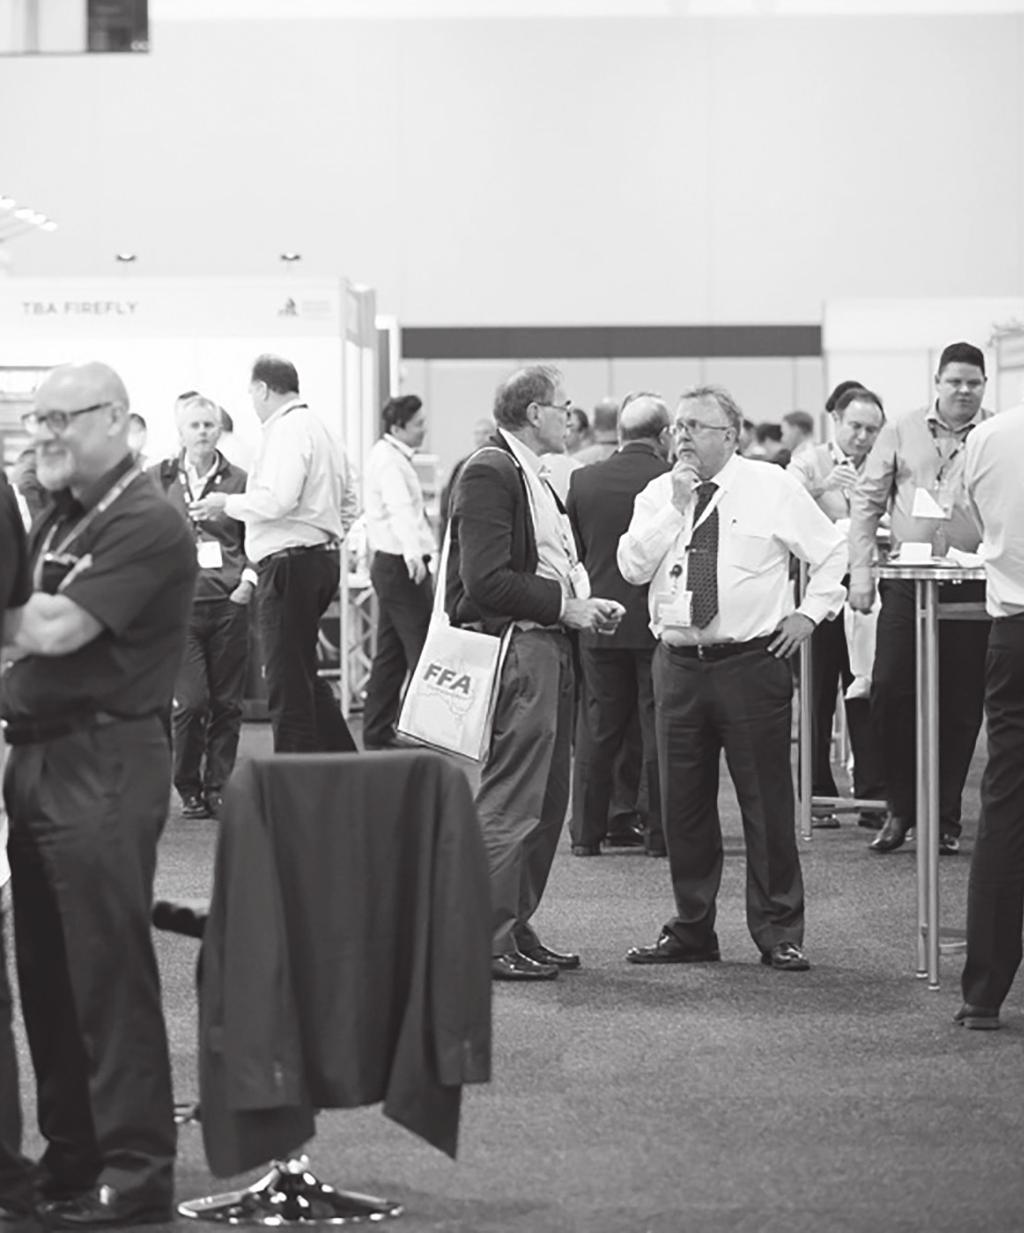 FIRE AUSTRALIA 2018 CONFERENCE & TRADESHOW THE FIRE AUSTRALIA 2018 PROGRAM WILL CONTINUE TO ADVANCE THE FIRE PROTECTION INDUSTRY WITH THIS YEAR S CONFERENCE THEME CHANGE. CHALLENGE. OPPORTUNITIES.